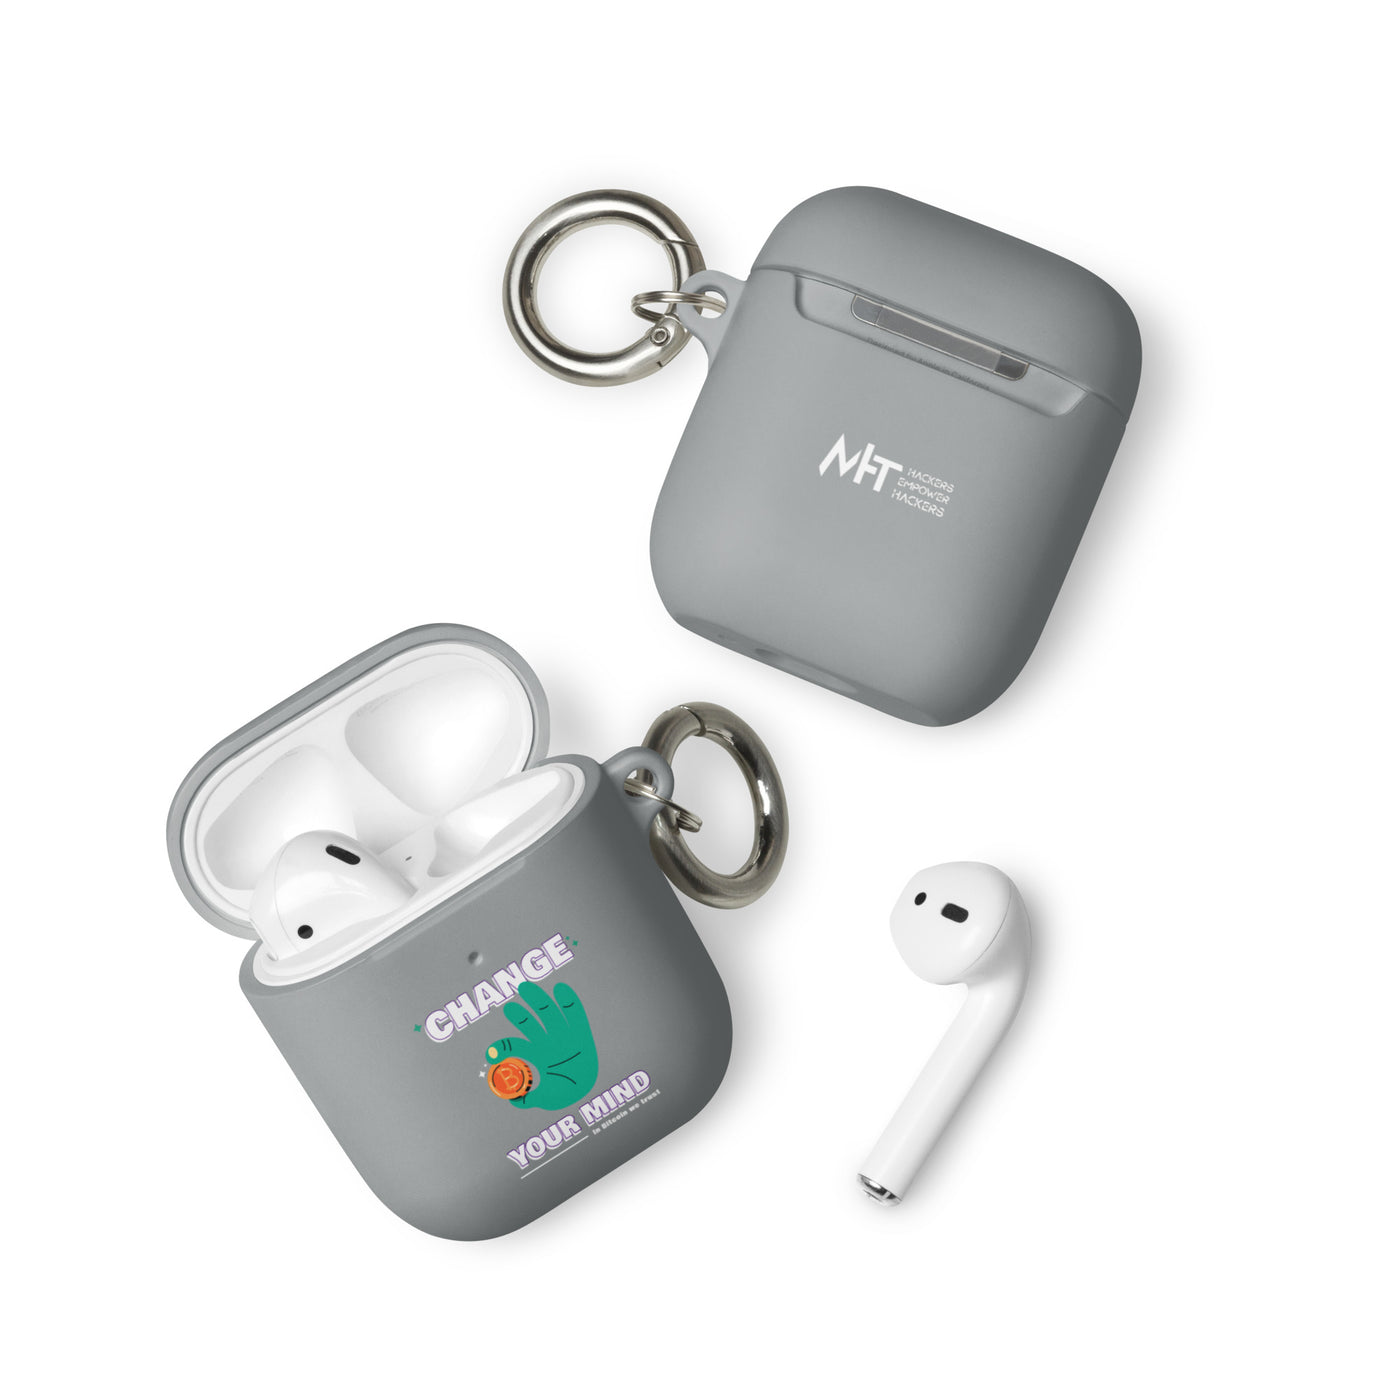 Change your mind in Bitcoin we Trust - AirPods case